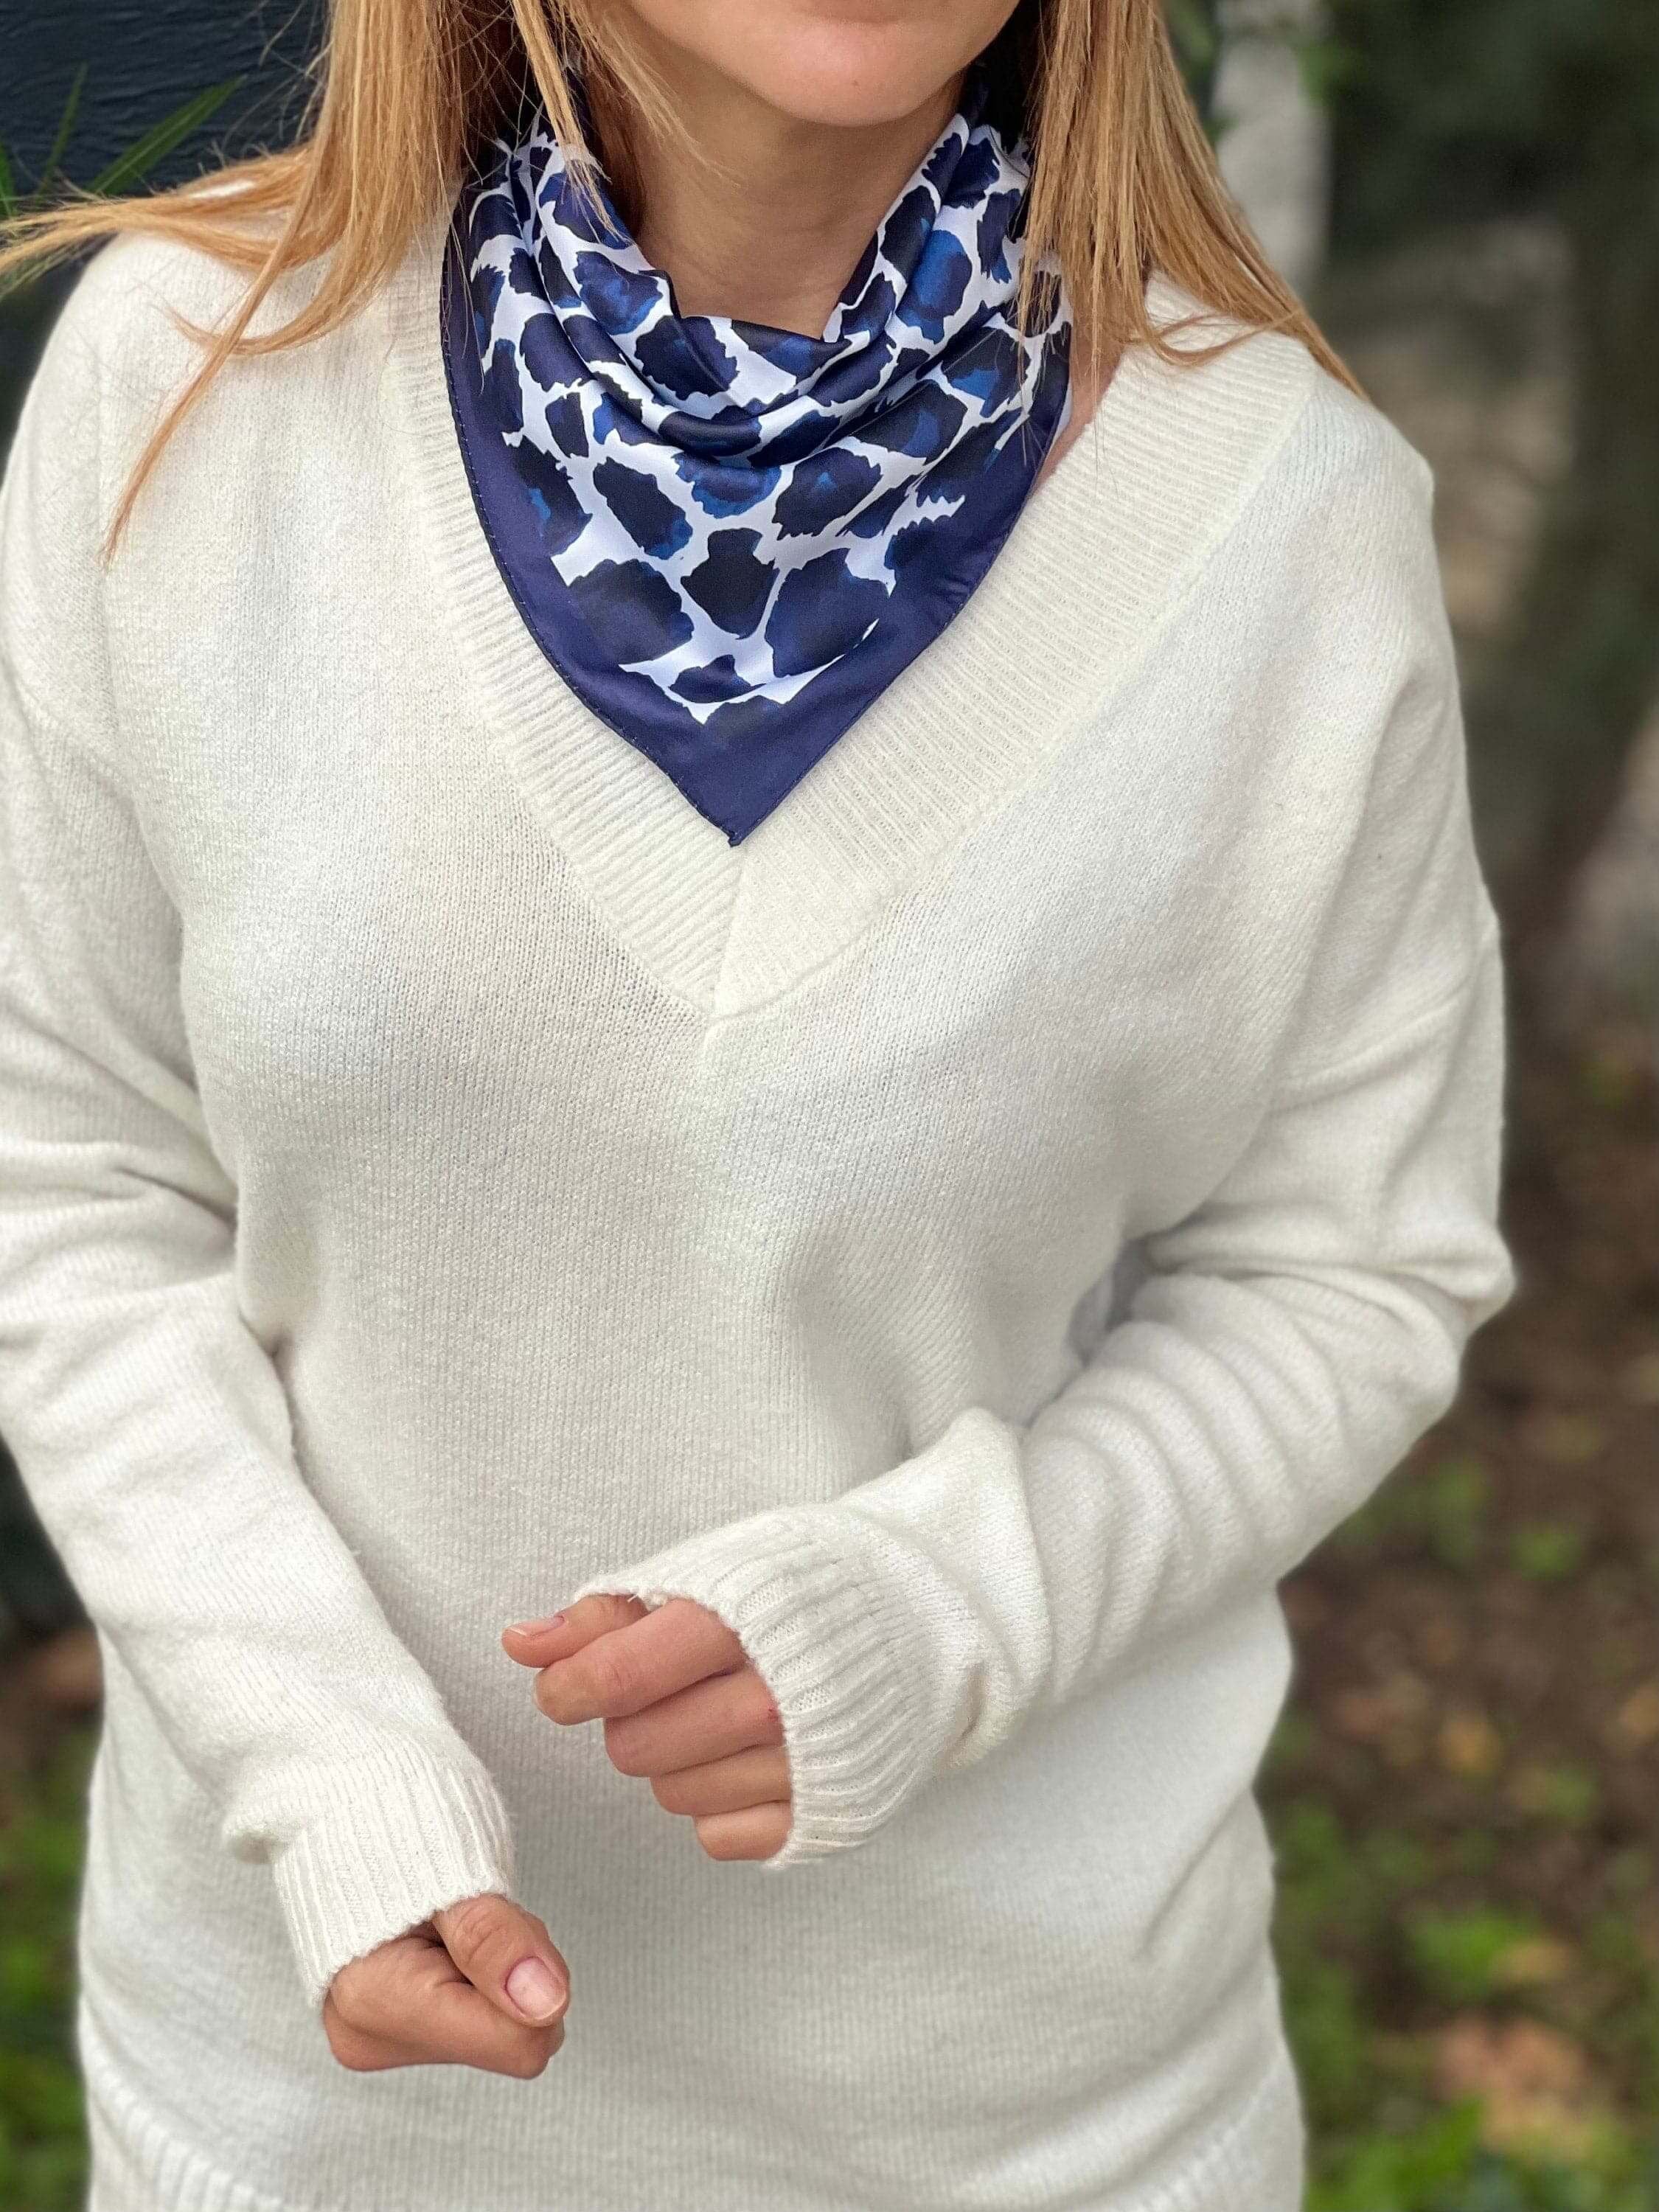 Elevate her accessory collection with this 100% satin scarf, featuring a trendy leopard print in navy blue.